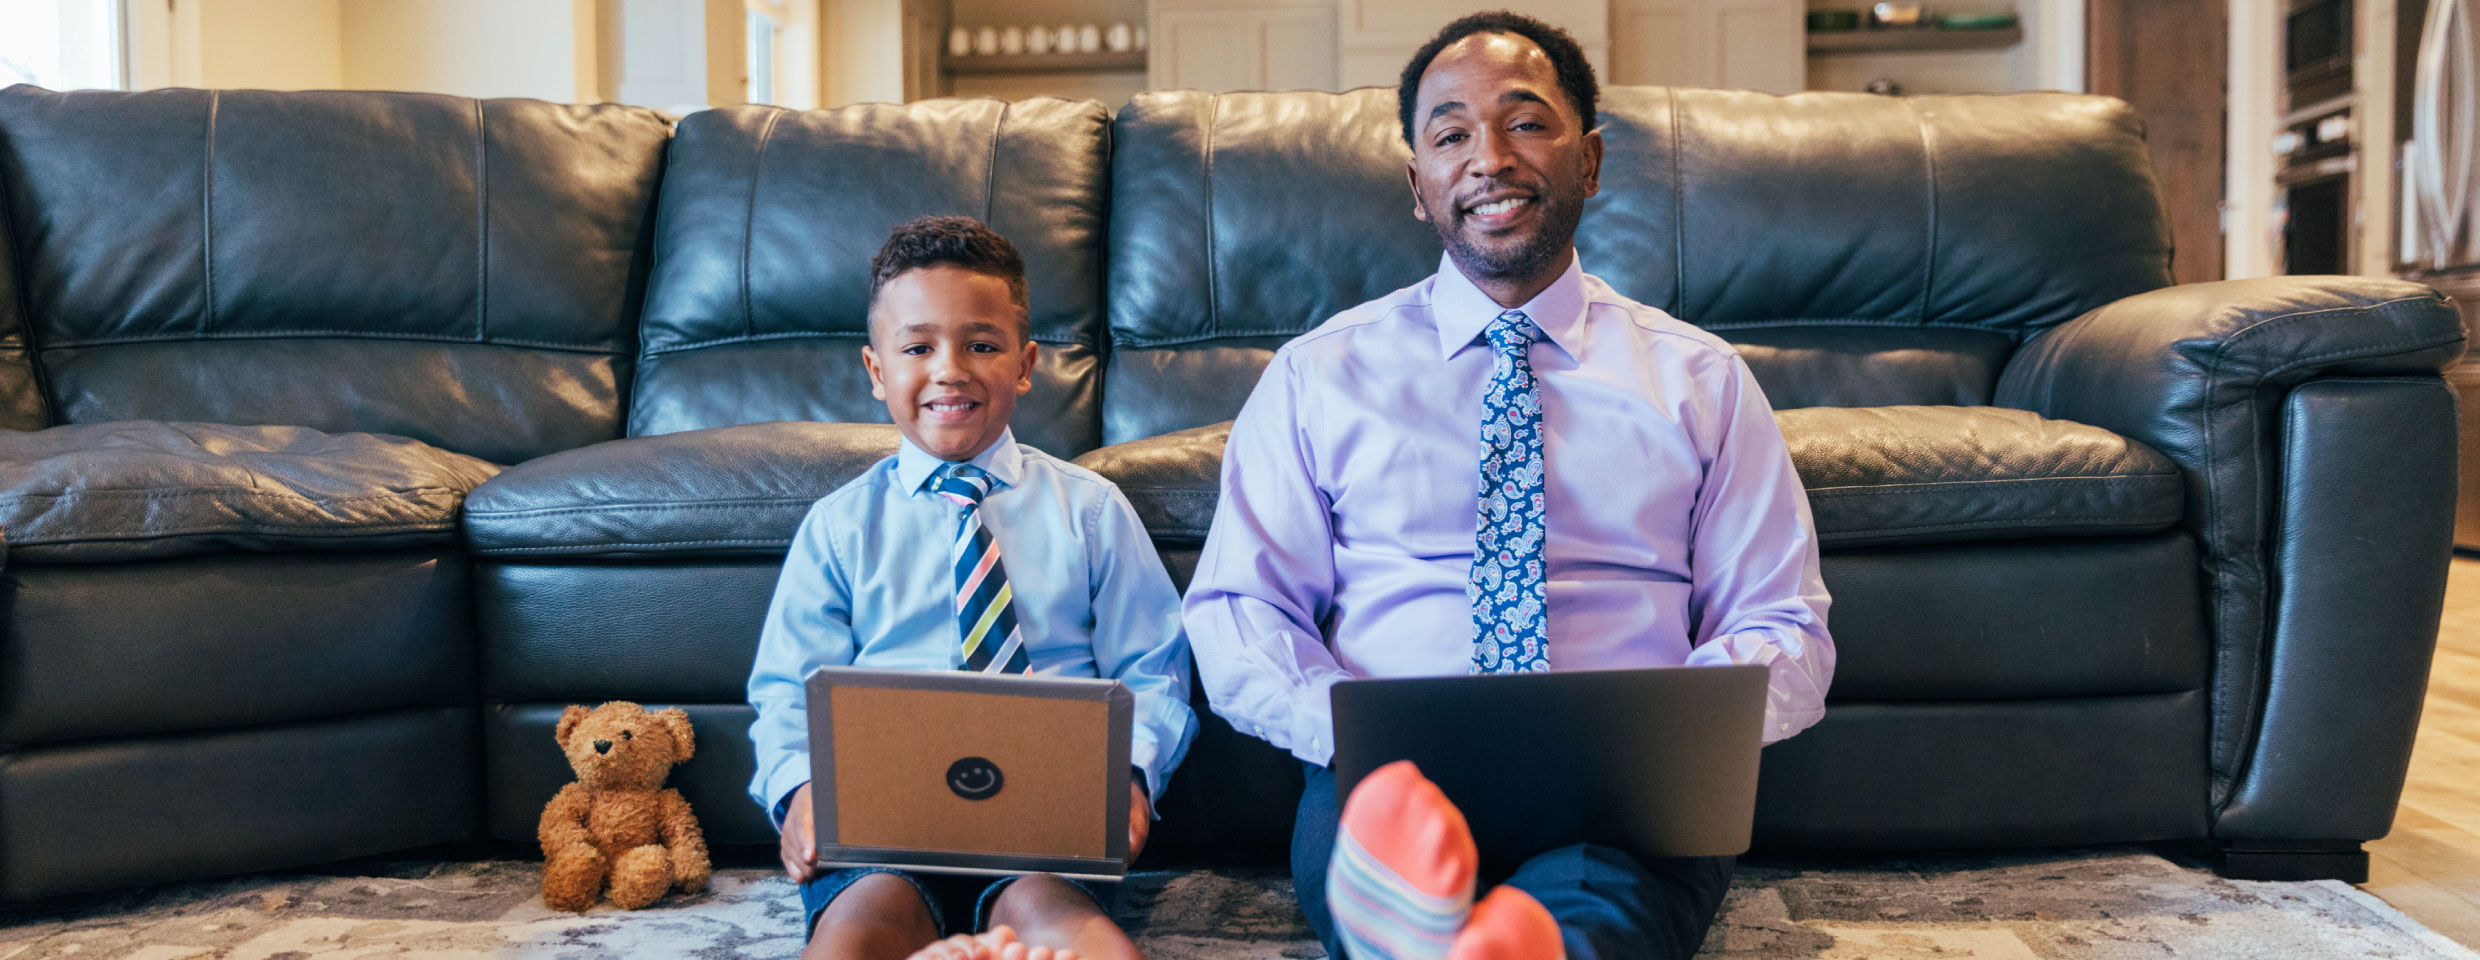 father and son with laptops, smiling, colorful socks